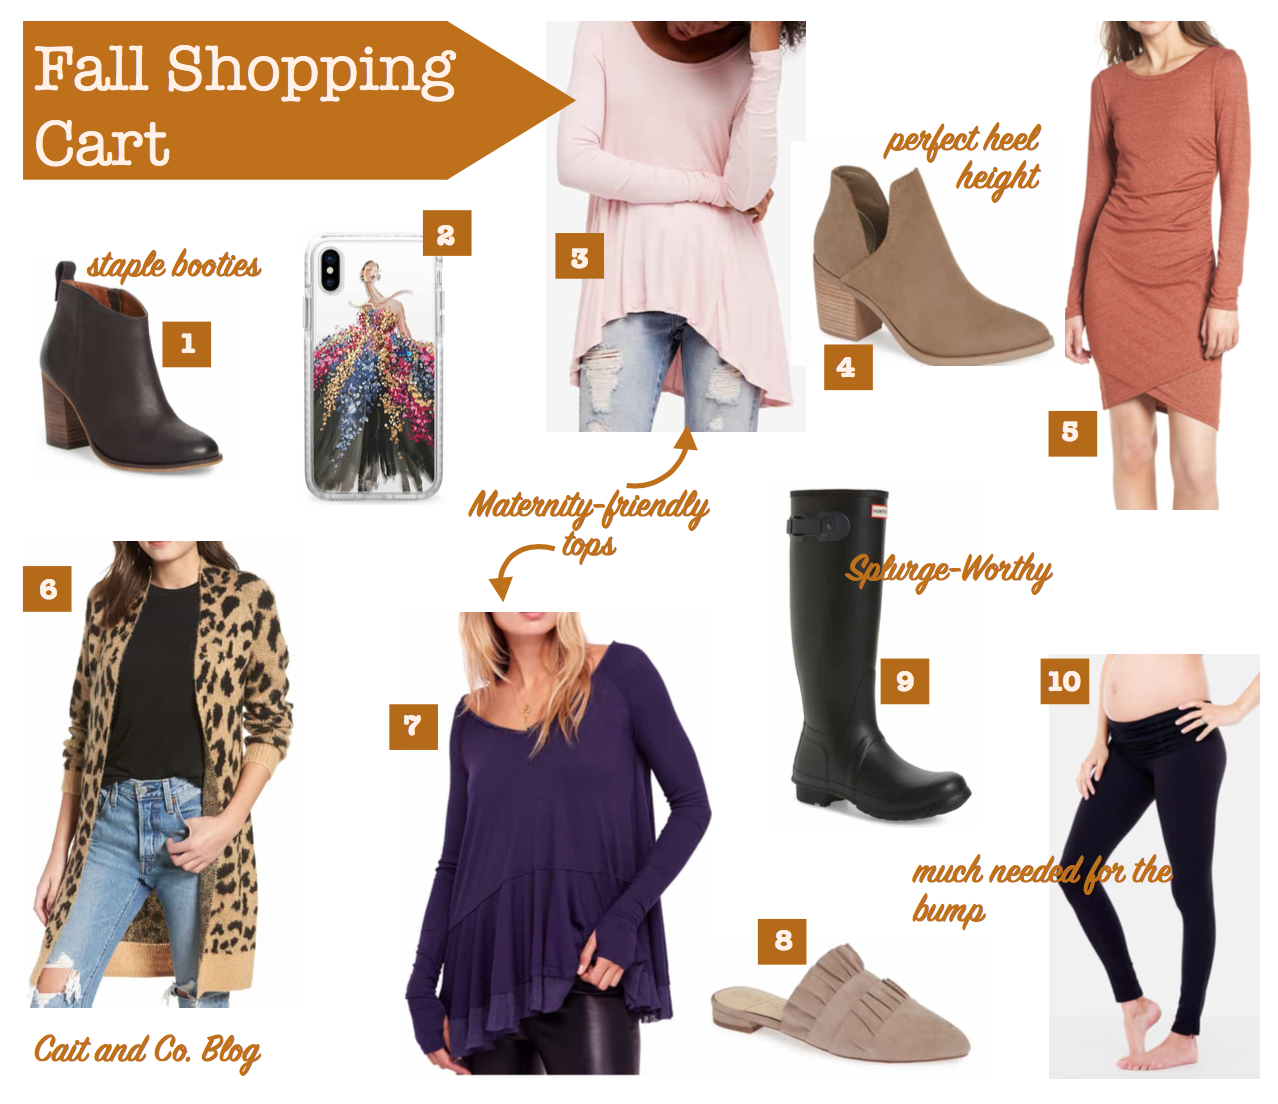 My Fall Shopping Cart – Cait and Co. Blog